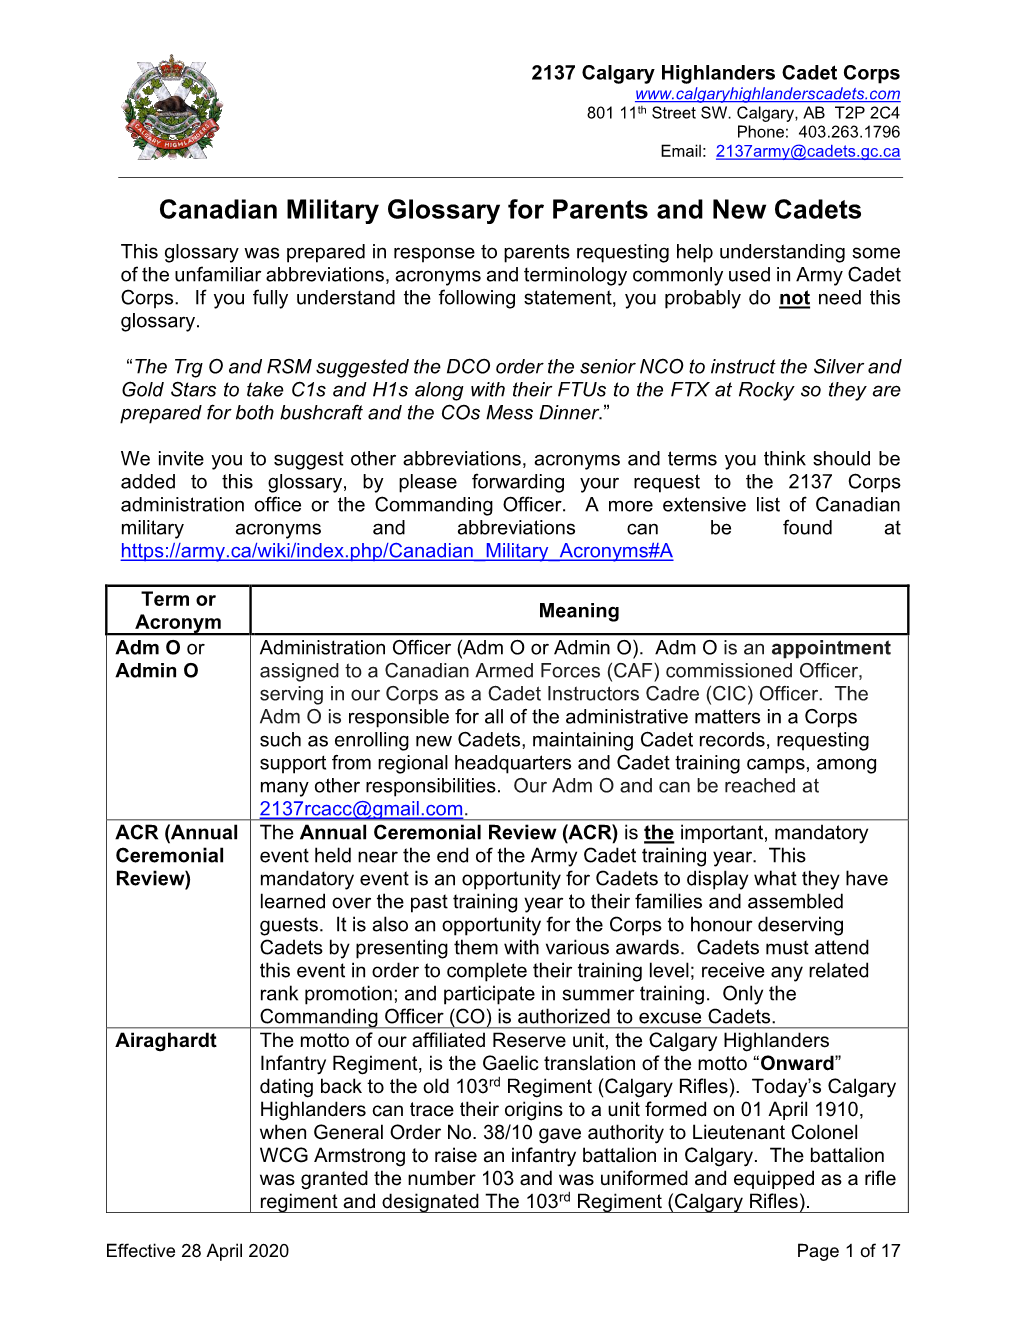 Canadian Military Glossary for Parents and New Cadets